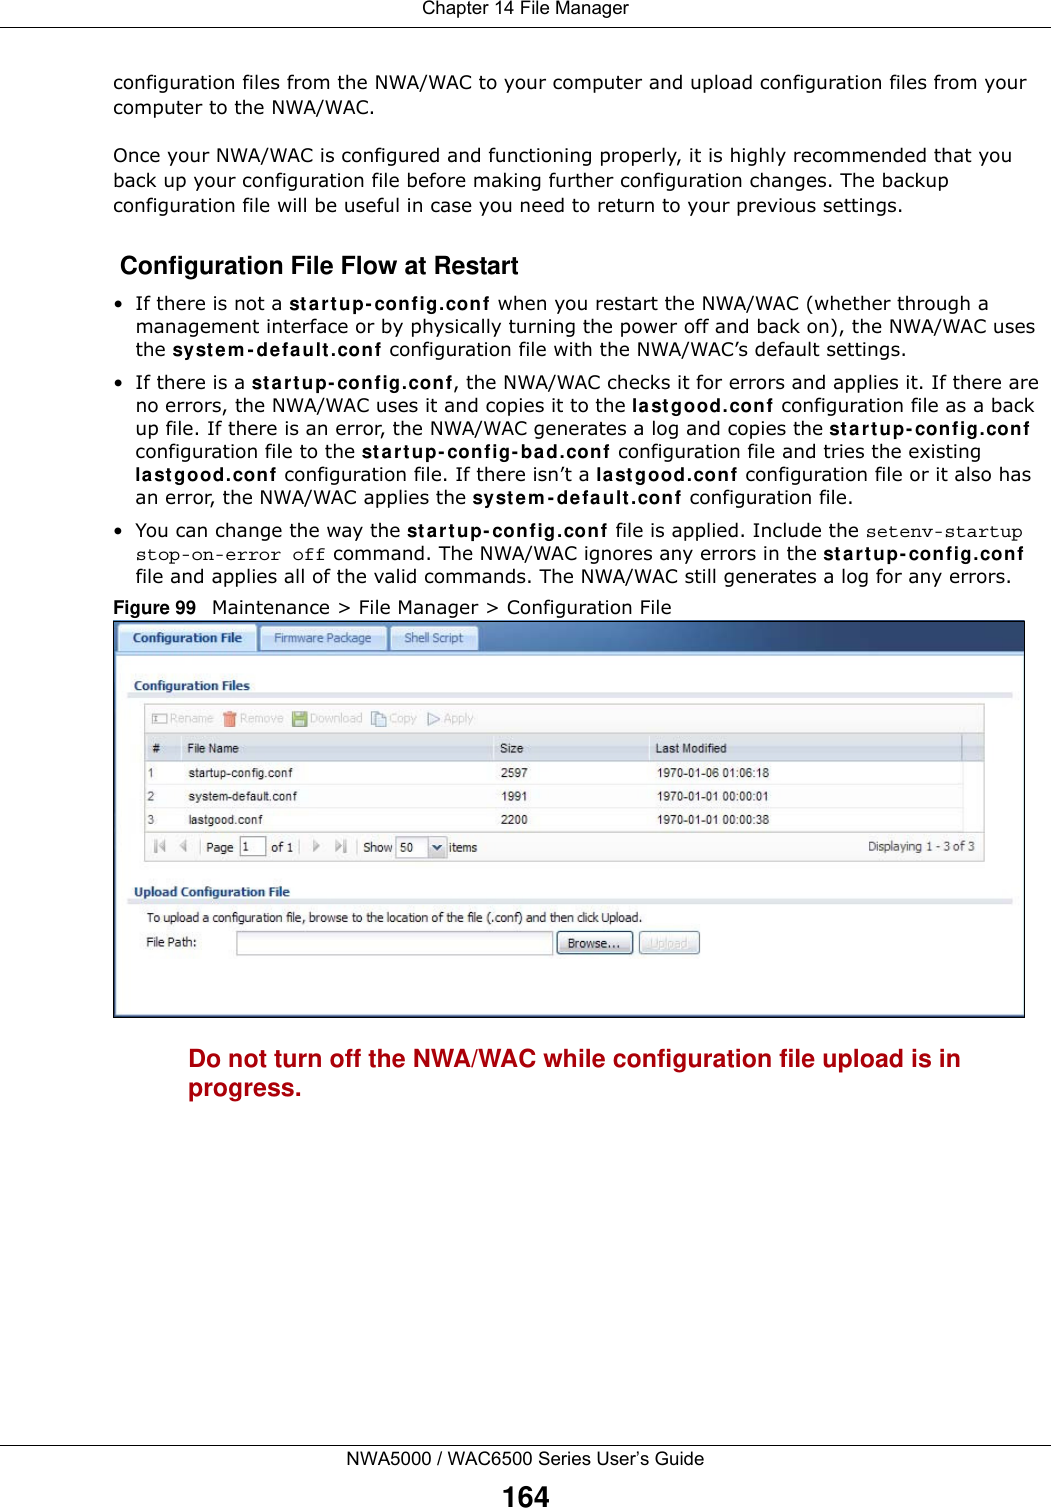 Chapter 14 File ManagerNWA5000 / WAC6500 Series User’s Guide164configuration files from the NWA/WAC to your computer and upload configuration files from your computer to the NWA/WAC.Once your NWA/WAC is configured and functioning properly, it is highly recommended that you back up your configuration file before making further configuration changes. The backup configuration file will be useful in case you need to return to your previous settings. Configuration File Flow at Restart• If there is not a st ar t up- config.conf when you restart the NWA/WAC (whether through a management interface or by physically turning the power off and back on), the NWA/WAC uses the sy st e m - d efa ult . conf configuration file with the NWA/WAC’s default settings.•If there is a st a r t up- config .co nf, the NWA/WAC checks it for errors and applies it. If there are no errors, the NWA/WAC uses it and copies it to the la st g ood.con f configuration file as a back up file. If there is an error, the NWA/WAC generates a log and copies the st a rt up- config.con f configuration file to the st a r t up- config - ba d.con f configuration file and tries the existing la st g ood.conf configuration file. If there isn’t a last g ood.con f configuration file or it also has an error, the NWA/WAC applies the sy st e m - d efa ult . conf configuration file.• You can change the way the st a rt up- config .conf  file is applied. Include the setenv-startup stop-on-error off command. The NWA/WAC ignores any errors in the st a r t u p- config .conf file and applies all of the valid commands. The NWA/WAC still generates a log for any errors. Figure 99   Maintenance &gt; File Manager &gt; Configuration File Do not turn off the NWA/WAC while configuration file upload is in progress.